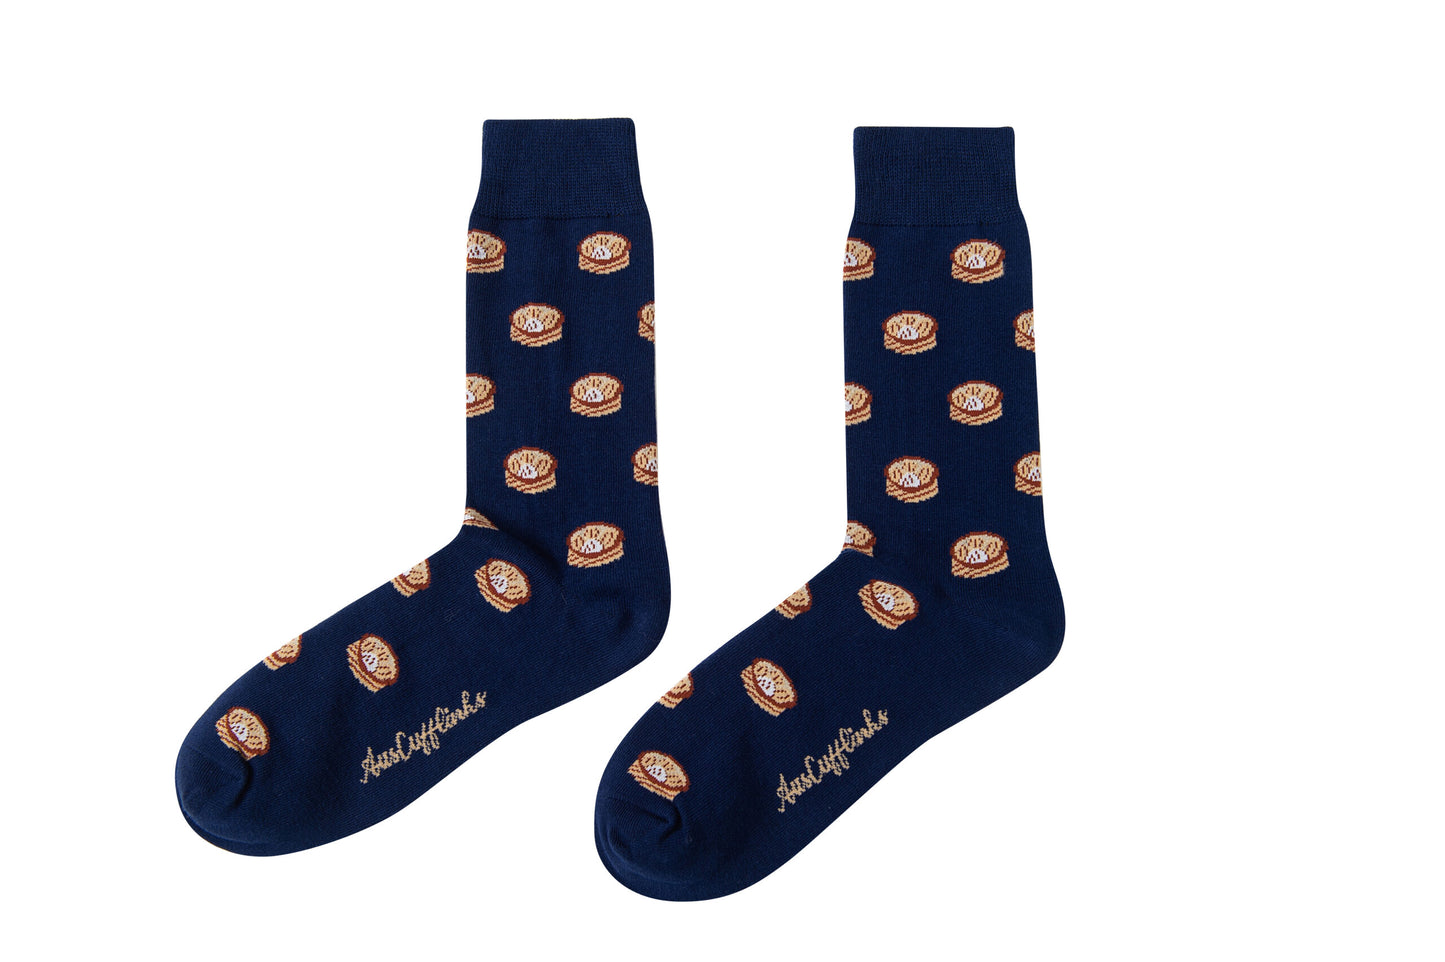 A pair of Dumpling Socks with food on them.